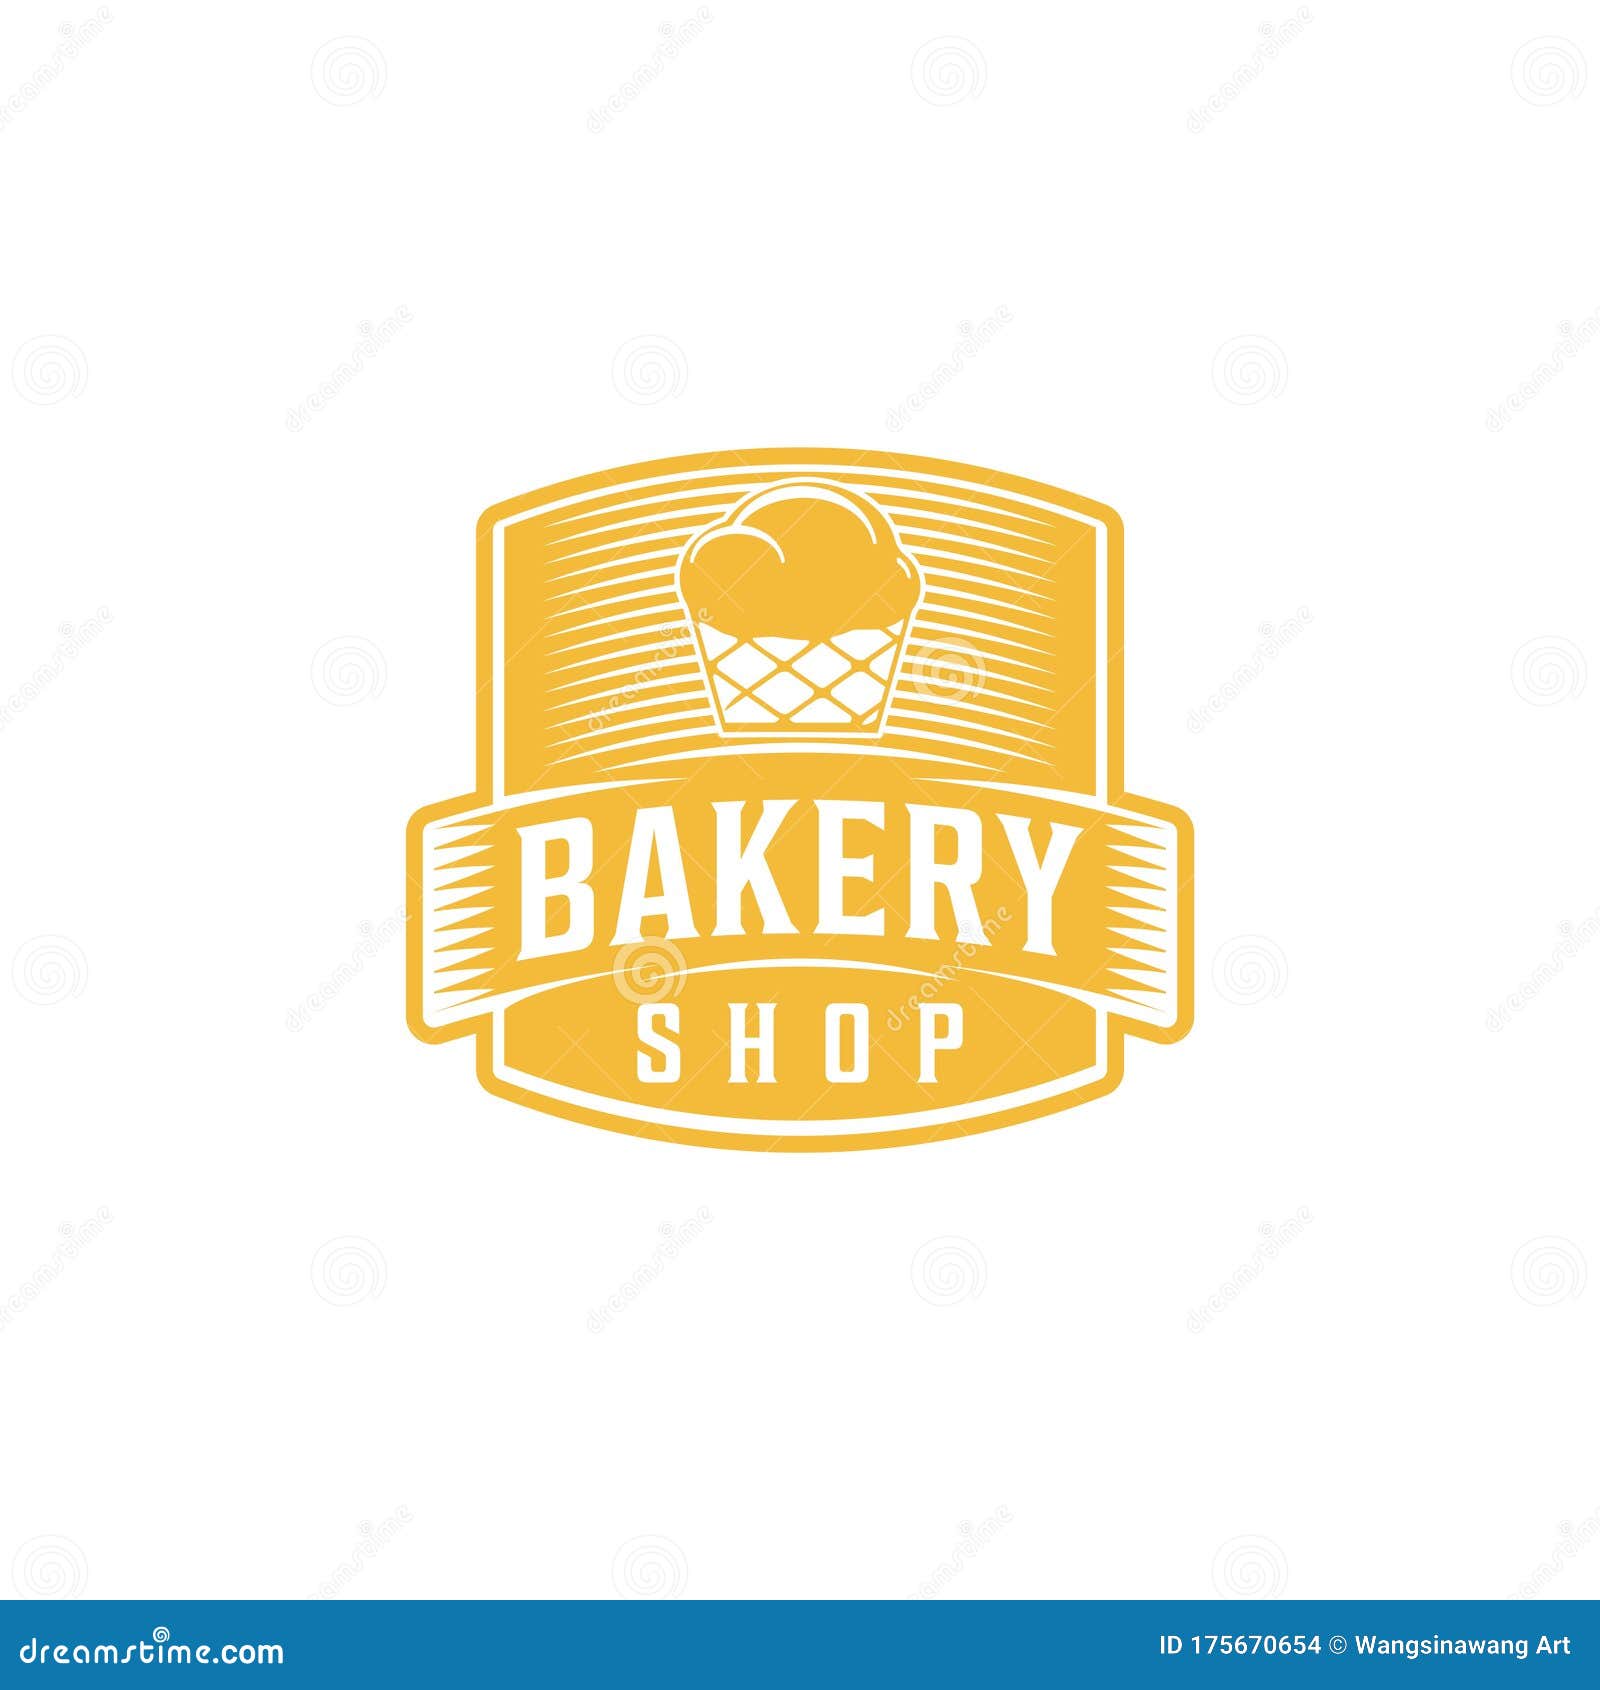 Sweet Cupcake Vintage Bakery Logo Ideas Inspiration Logo Design Template Vector Illustration Isolated On White Background Stock Vector Illustration Of Cafe Confectionery